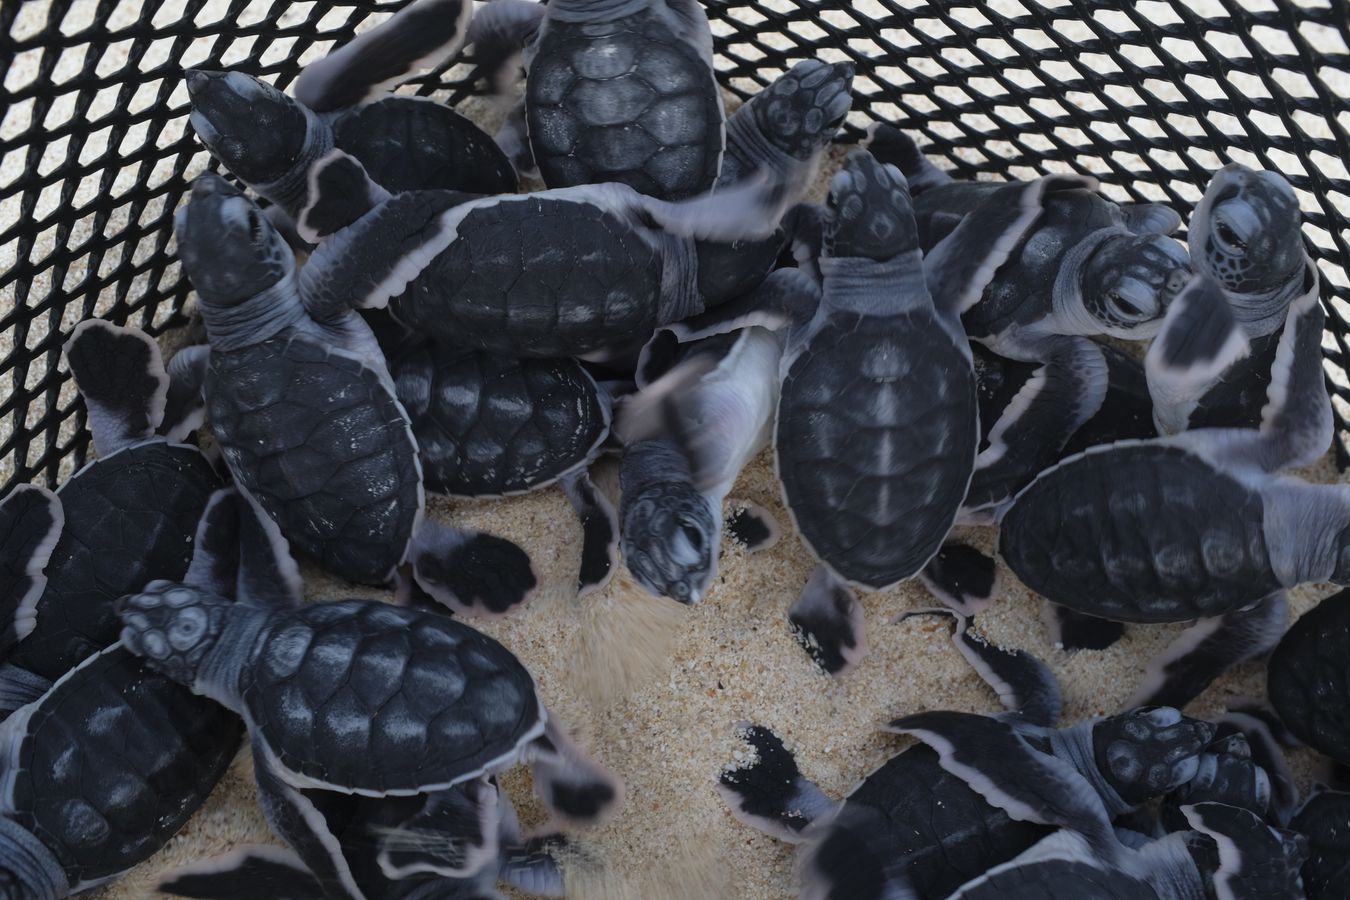 Newborn green turtles in their individual nest at the hatchery.